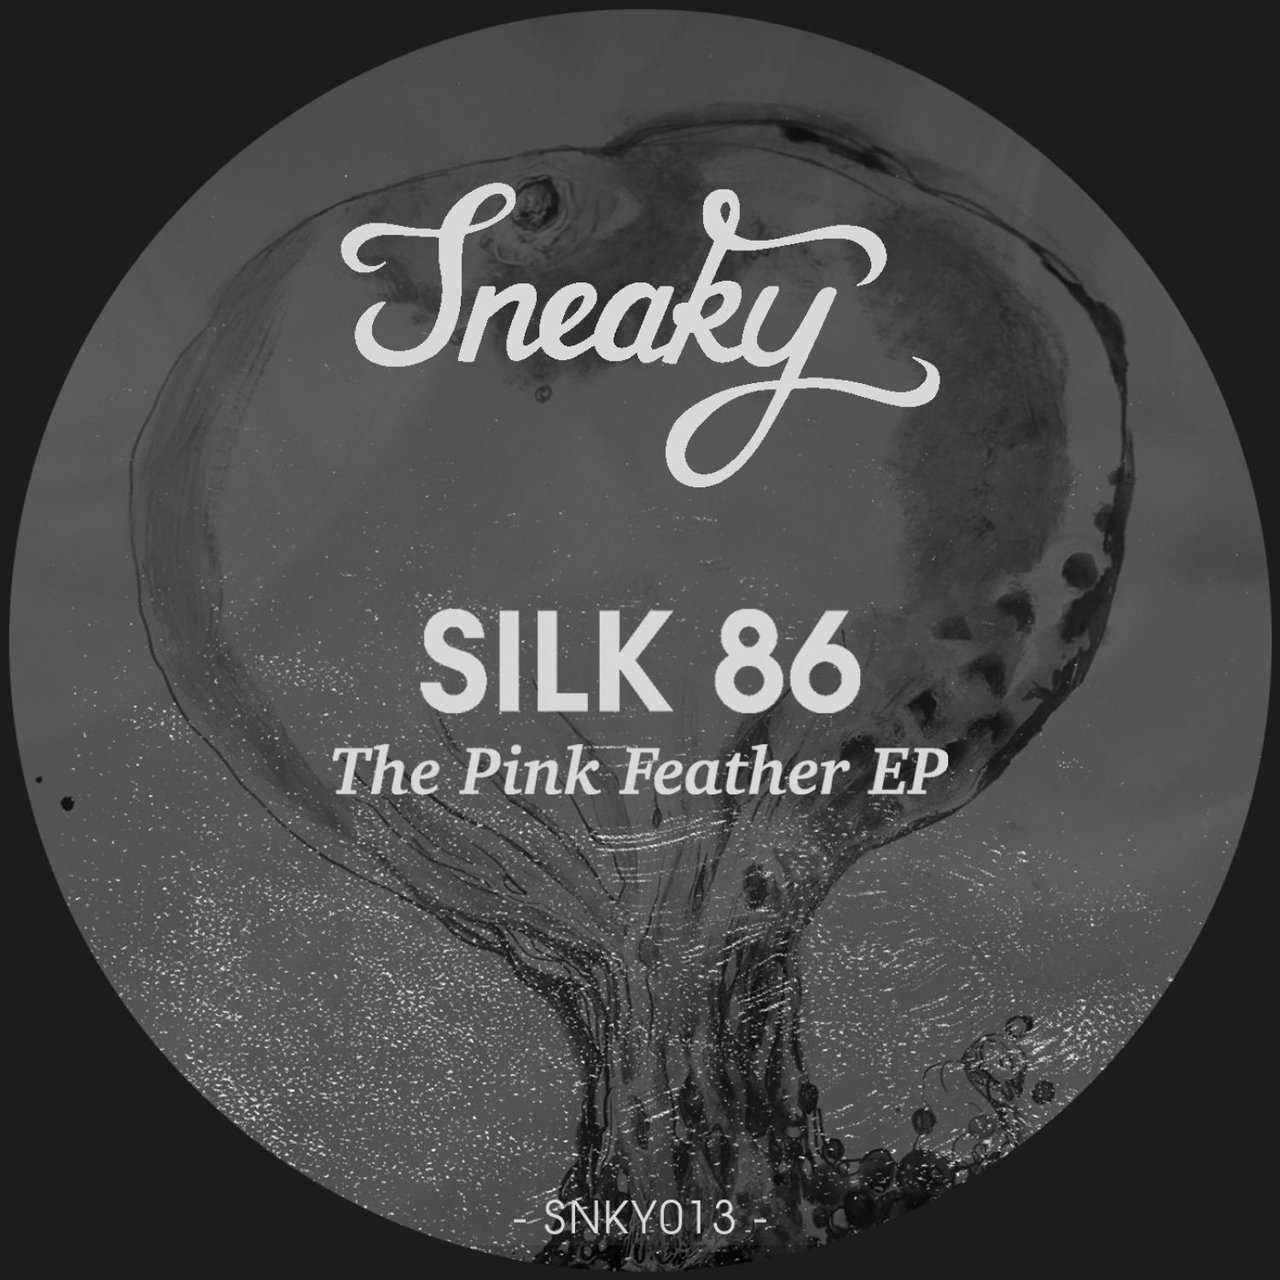 Silk 86 - The Pink Feather EP / Sneaky